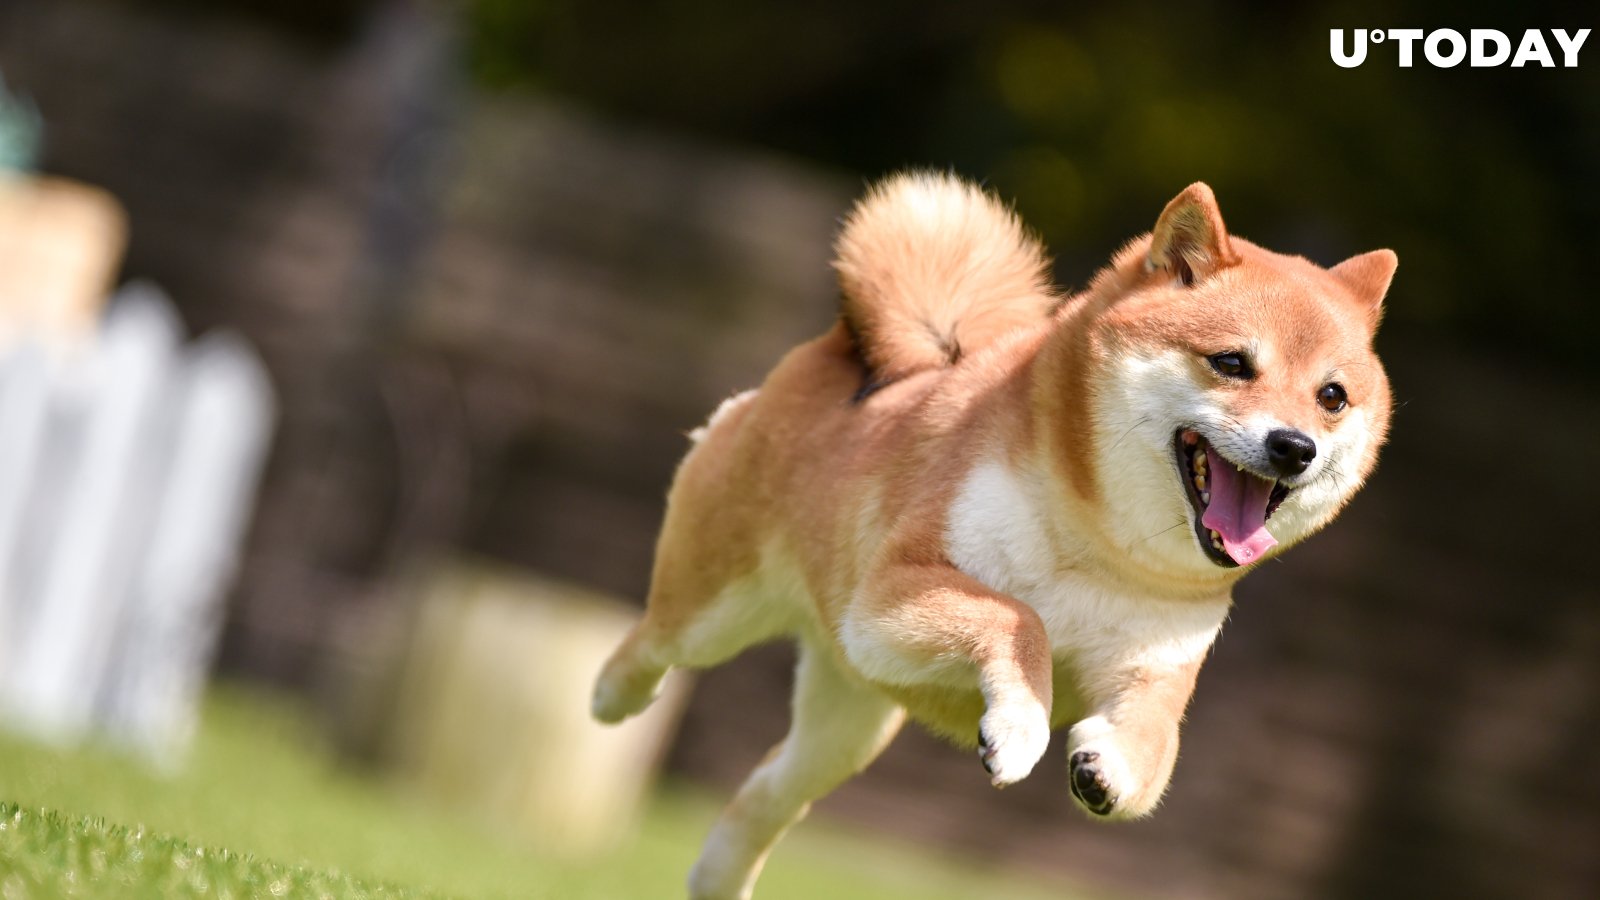 Shiba Inu (SHIB) Price Explodes, Dogecoin (DOGE) Storms Into Top 10